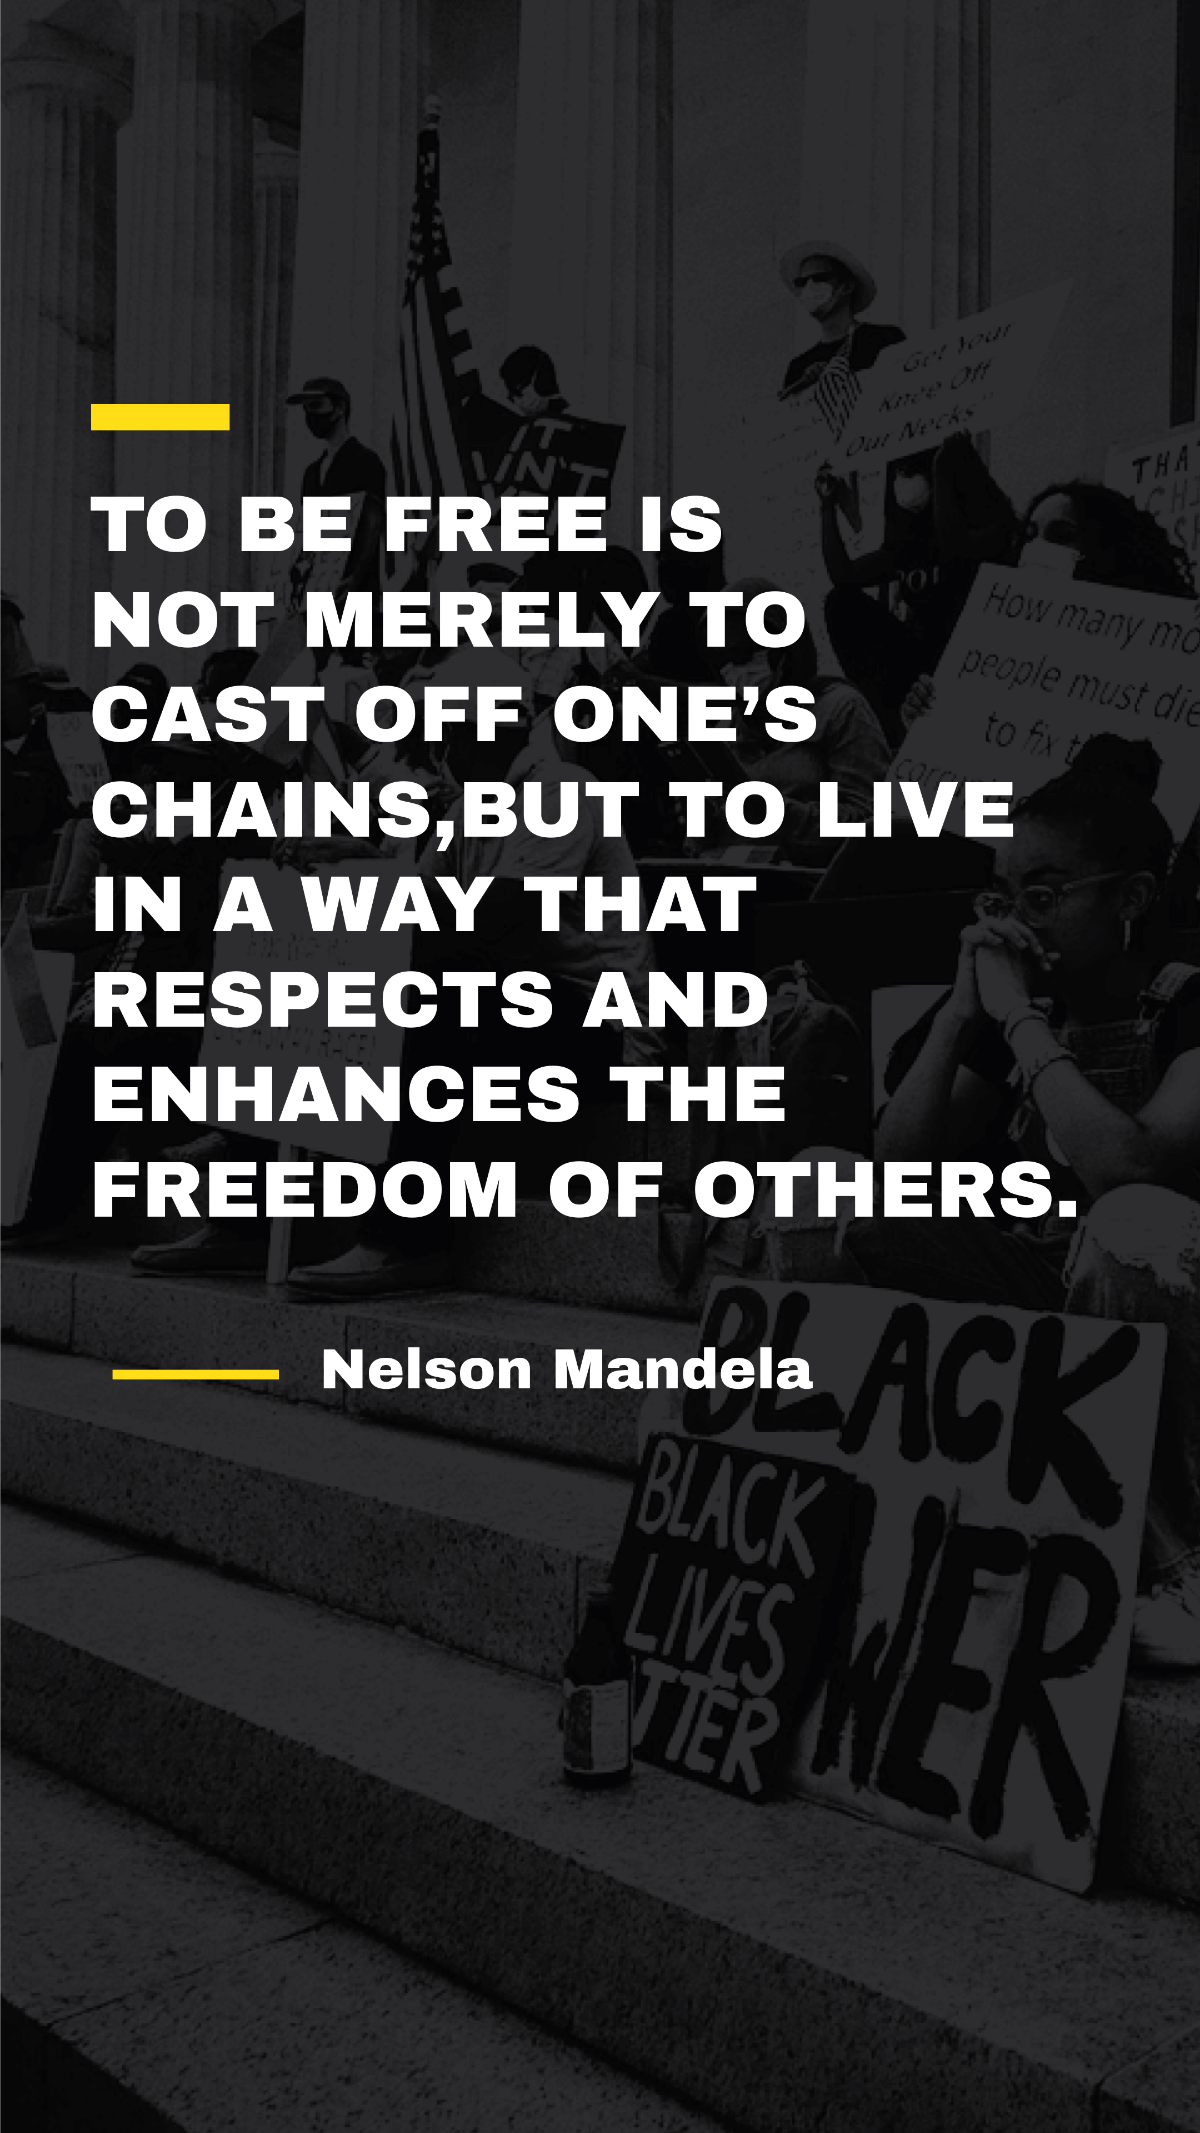 Nelson Mandela - To be is not merely to cast off one’s chains, but to live in a way that respects and enhances the freedom of others. Template